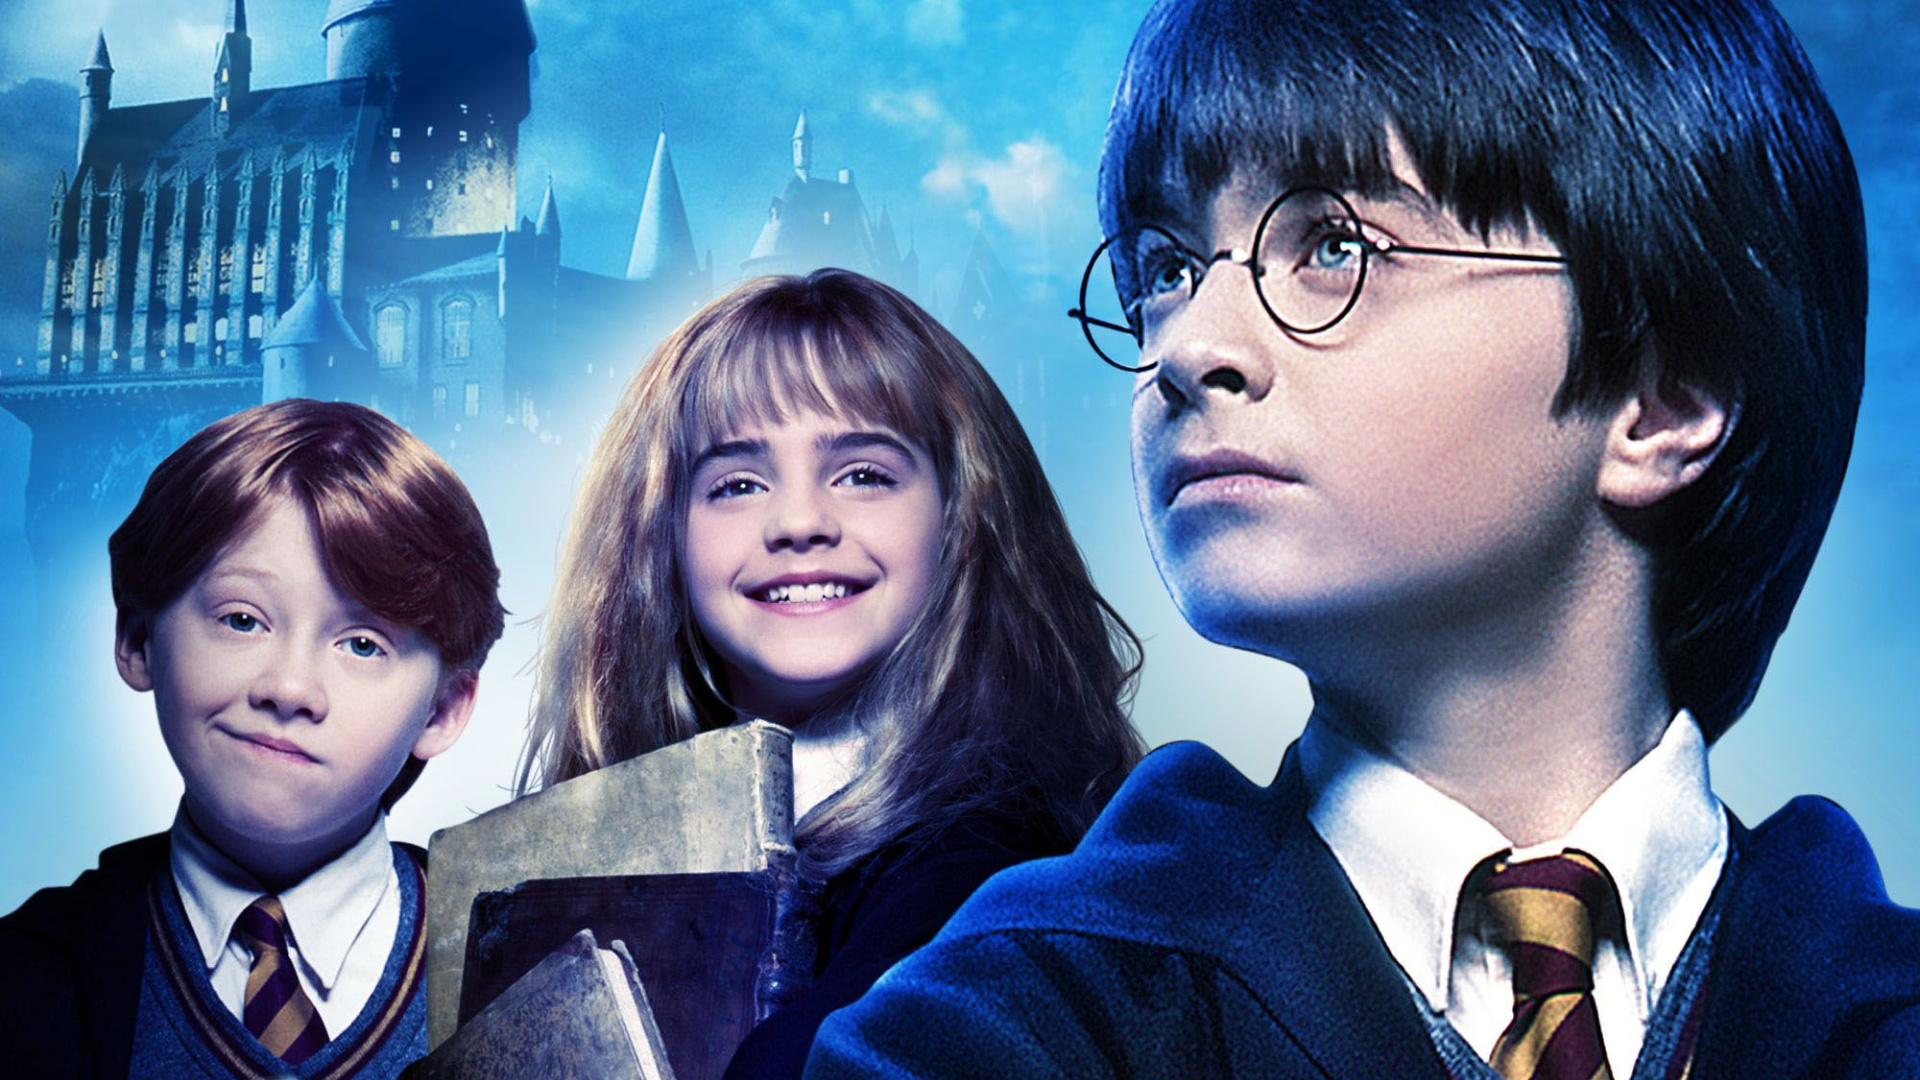 The Potterverse Hosts Mary & Blake give a full Harry Potter And The Sor...